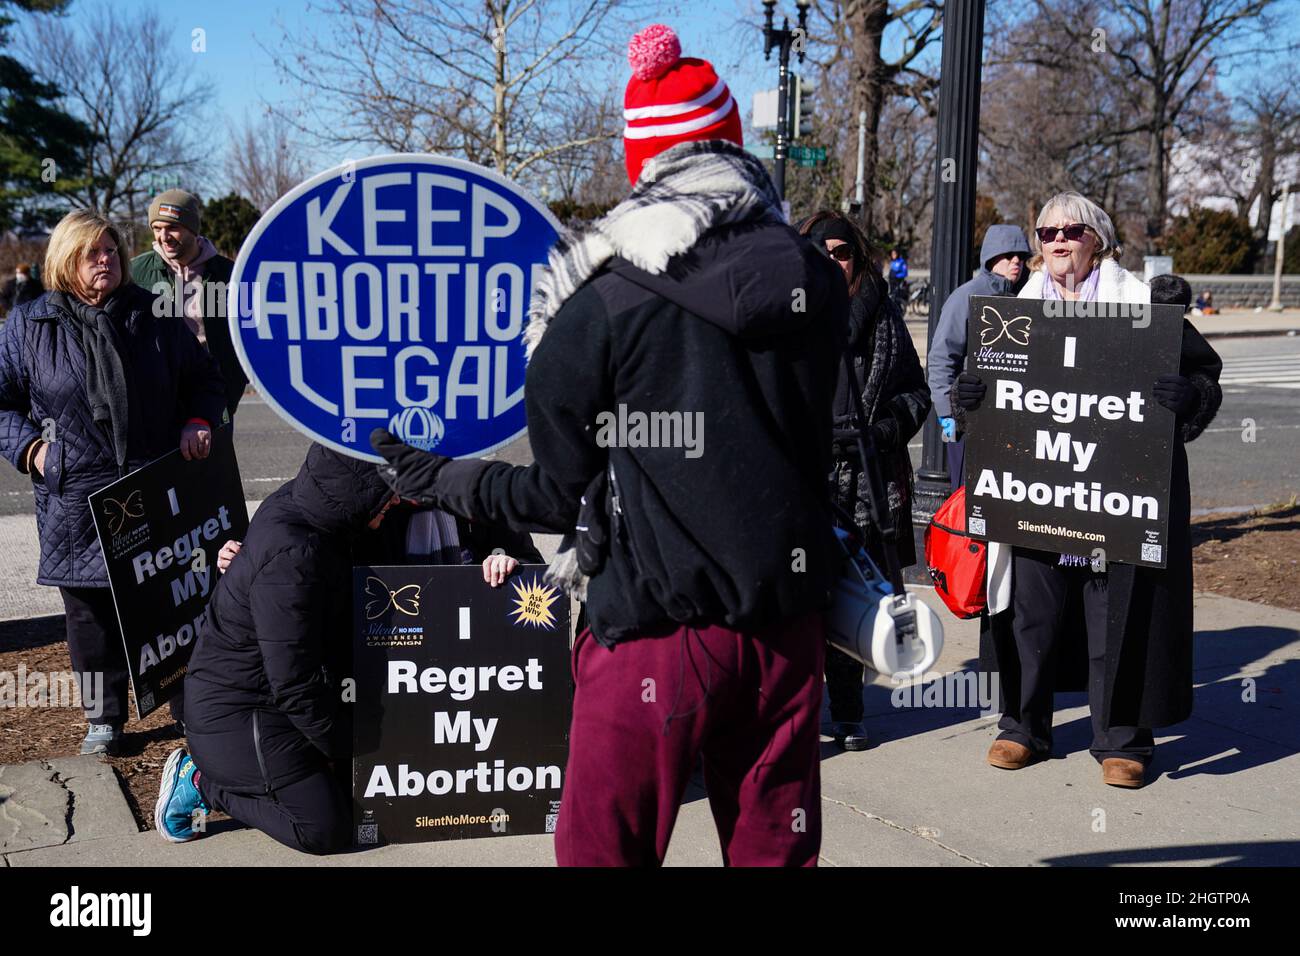 Anti-choice activists shout at a pro-choice demonstrator during a protest on the anniversary of the Roe v. Wade decision at the U.S. Supreme Court in Washington, U.S., January 22, 2022. REUTERS/Sarah Silbiger Stock Photo